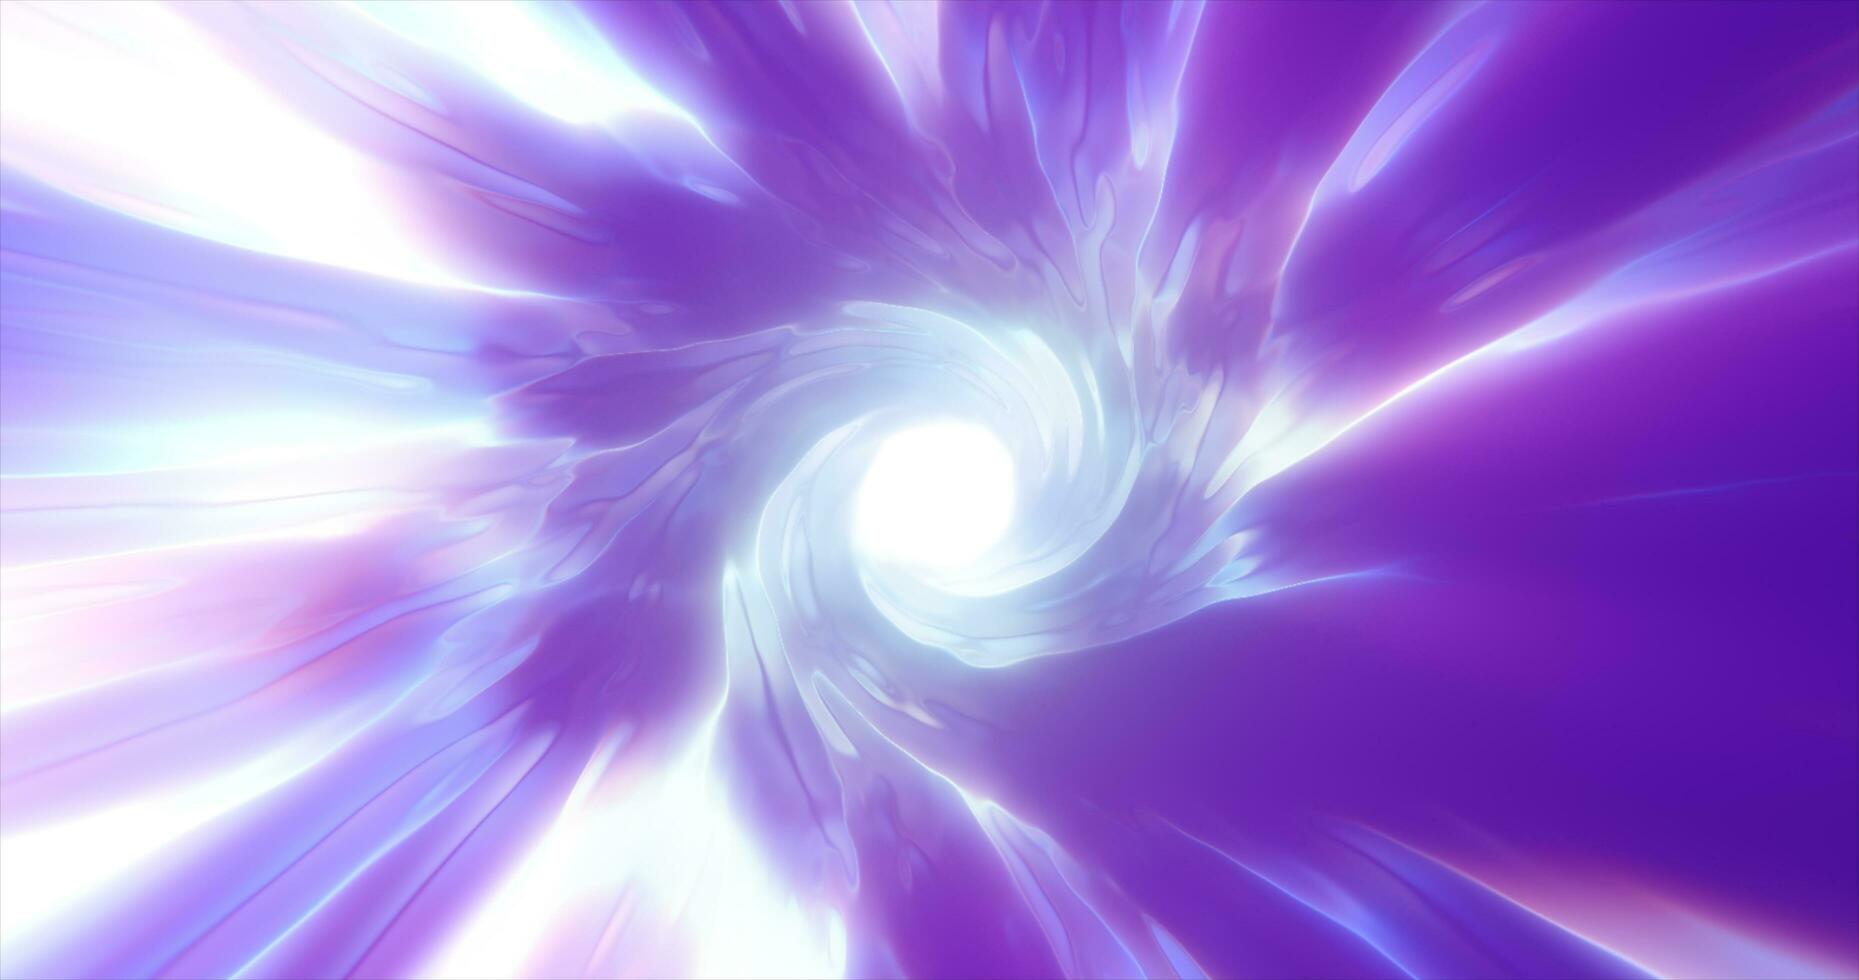 Abstract purple blue tunnel twisted swirl of cosmic hyperspace magical bright glowing futuristic hi-tech with blur and speed effect background photo